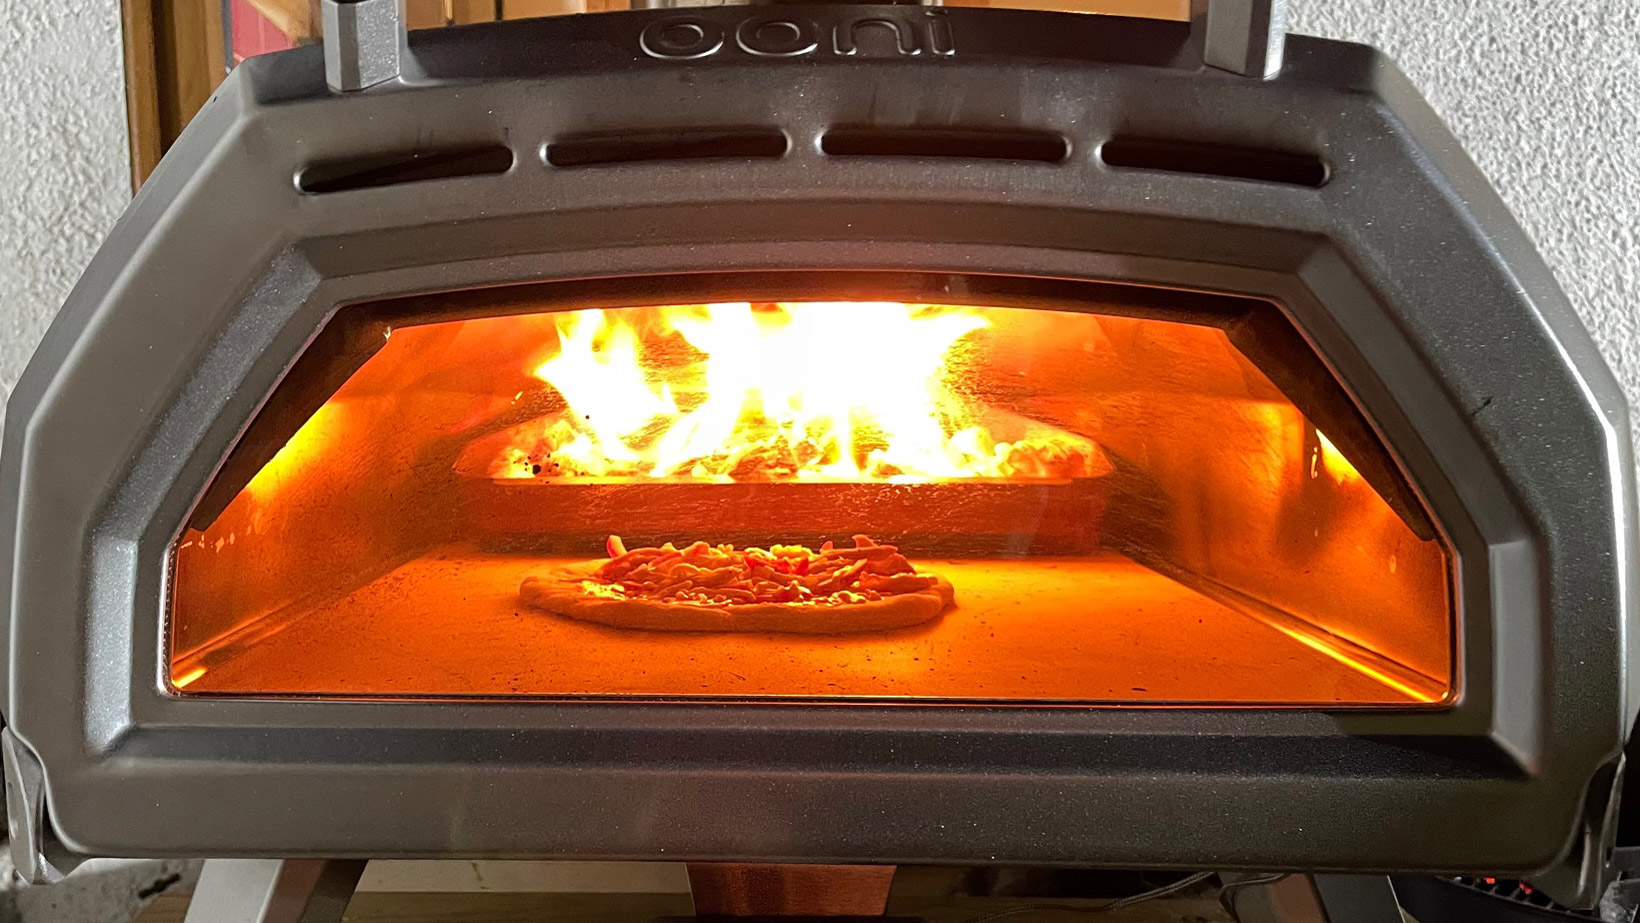 The Ooni Karu 16 being used to cook a pizza